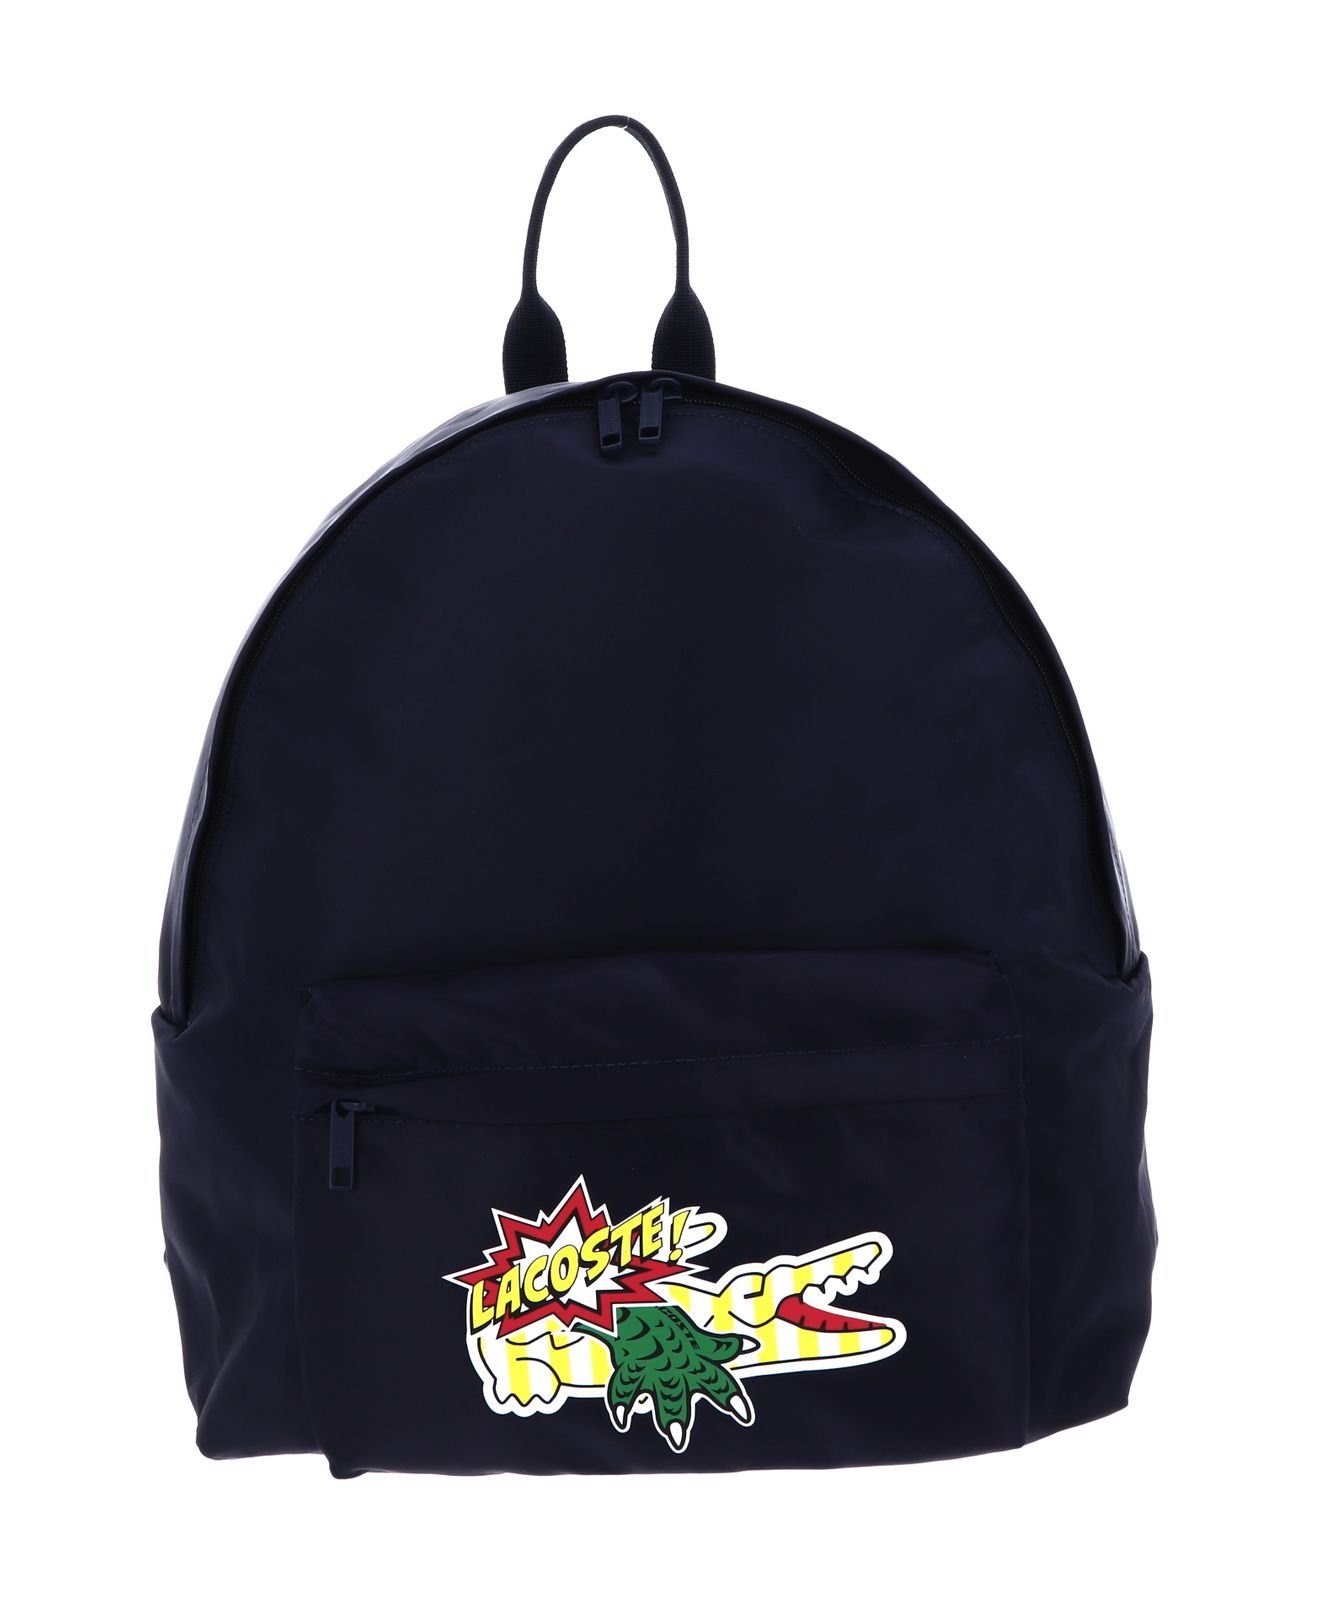 Lacoste Holiday Rucksack